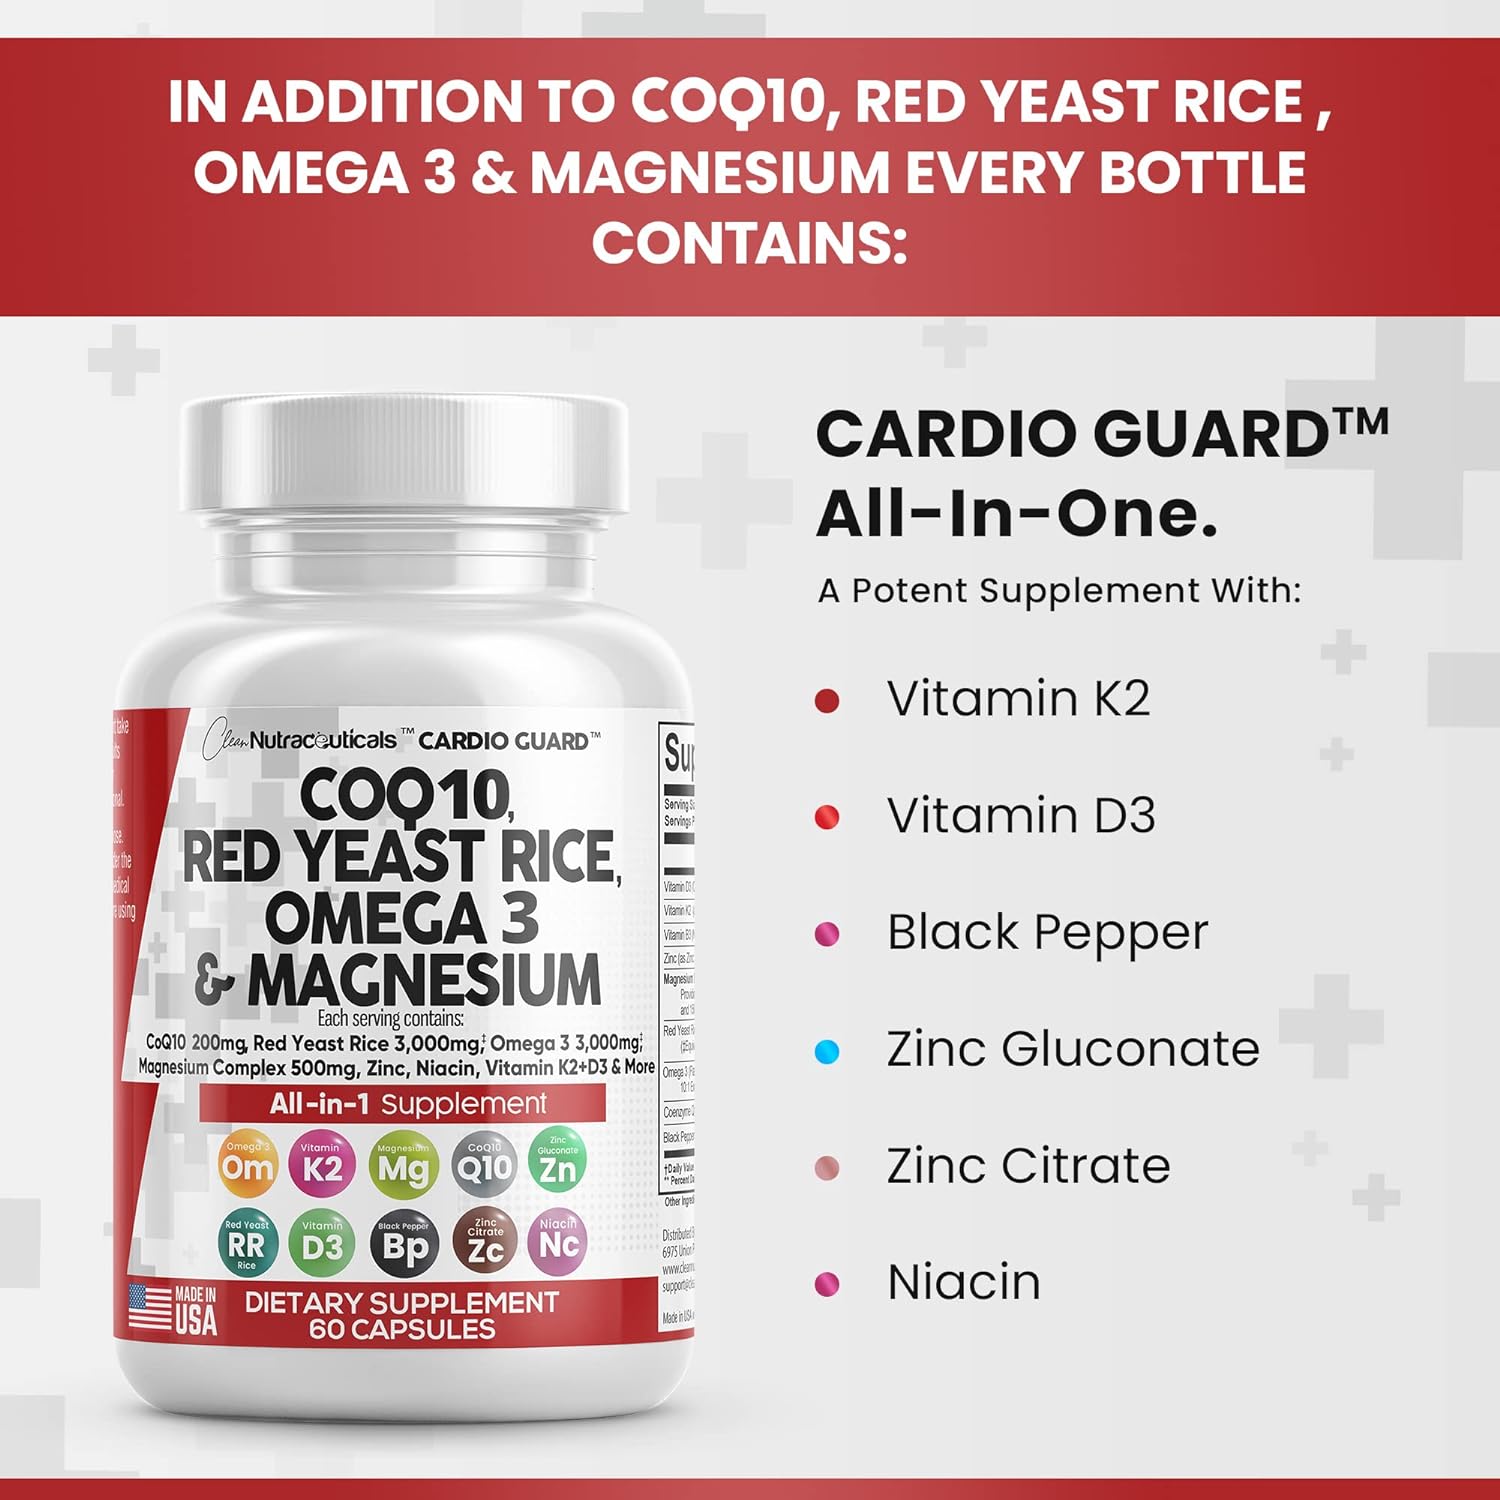 Clean Nutraceuticals COQ10 200mg Red Yeast Rice 3000mg Omega 3 3000mg Magnesium Complex 500mg Niacin Zinc Vitamin K2 D3 B3- Heart Health Support Vitamins for Women  Men with Coenzyme Q10-60 Ct